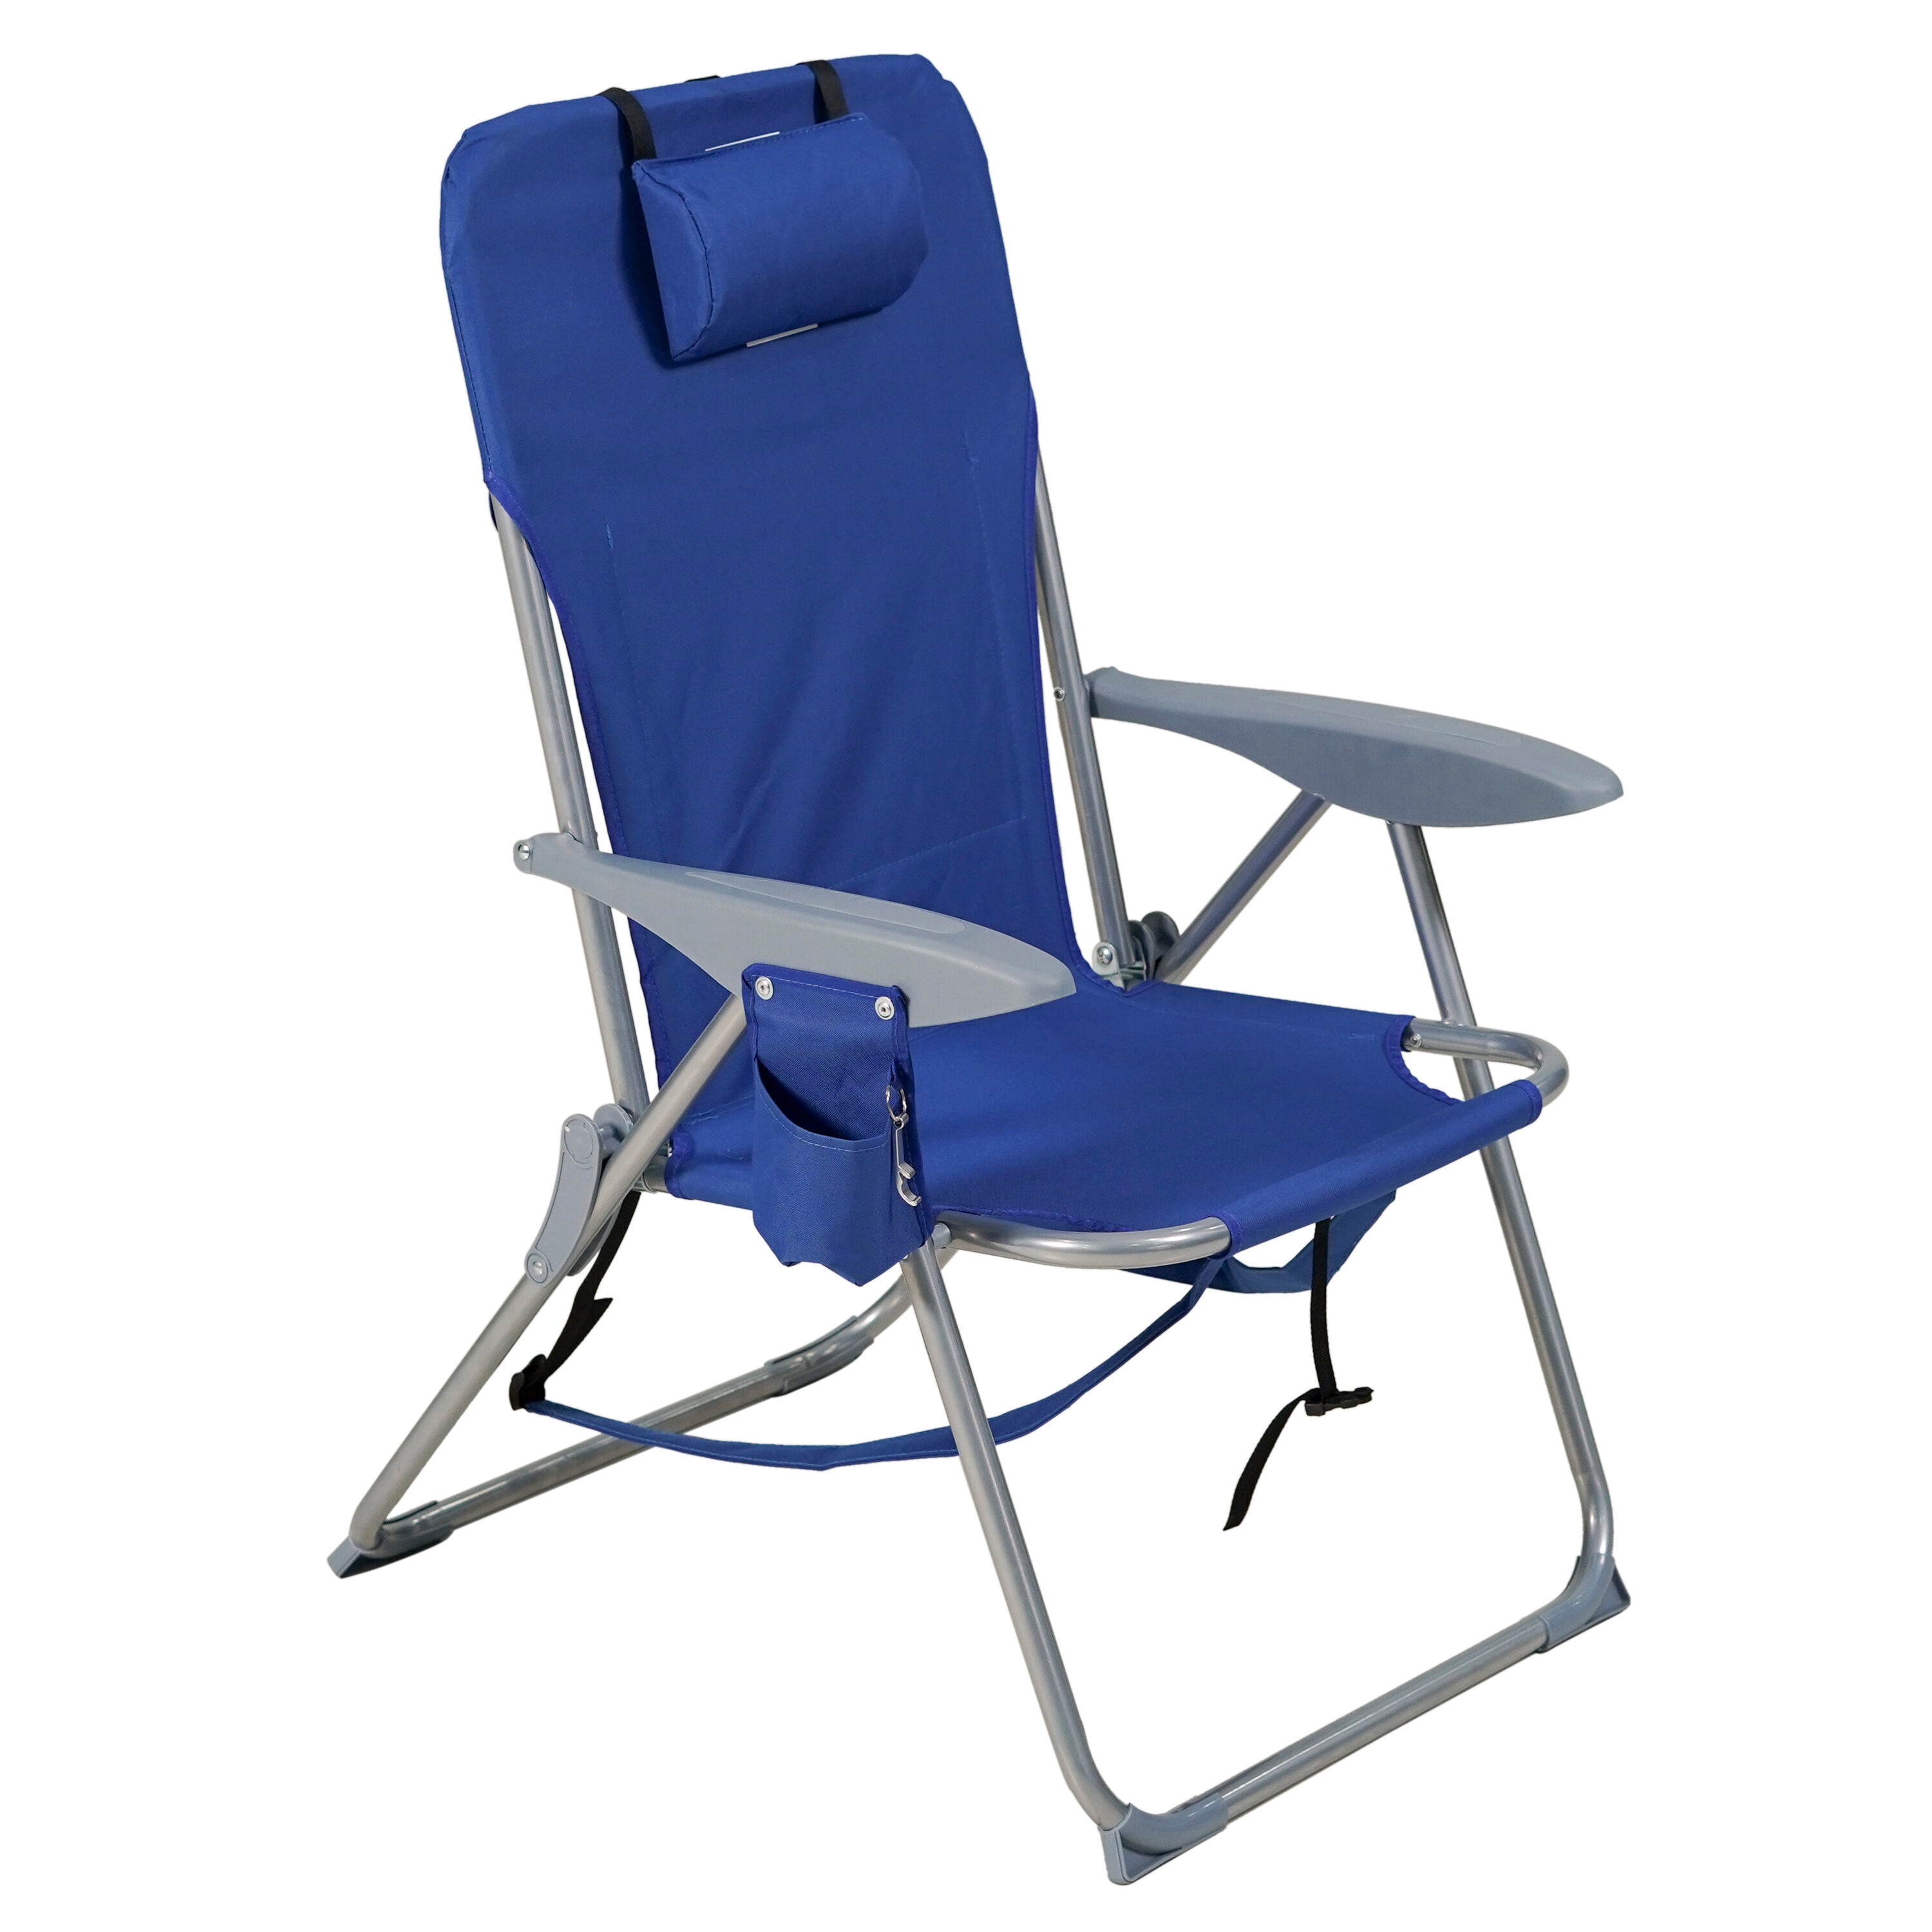  Portable Camp Chairs Deep Blue USA Flag Beach Chair Backpack  Backpacking Chair Ultra Lightweight with Carrying Bag Ice Fishing Chairs  for Adults for Sports Travel : Sports & Outdoors